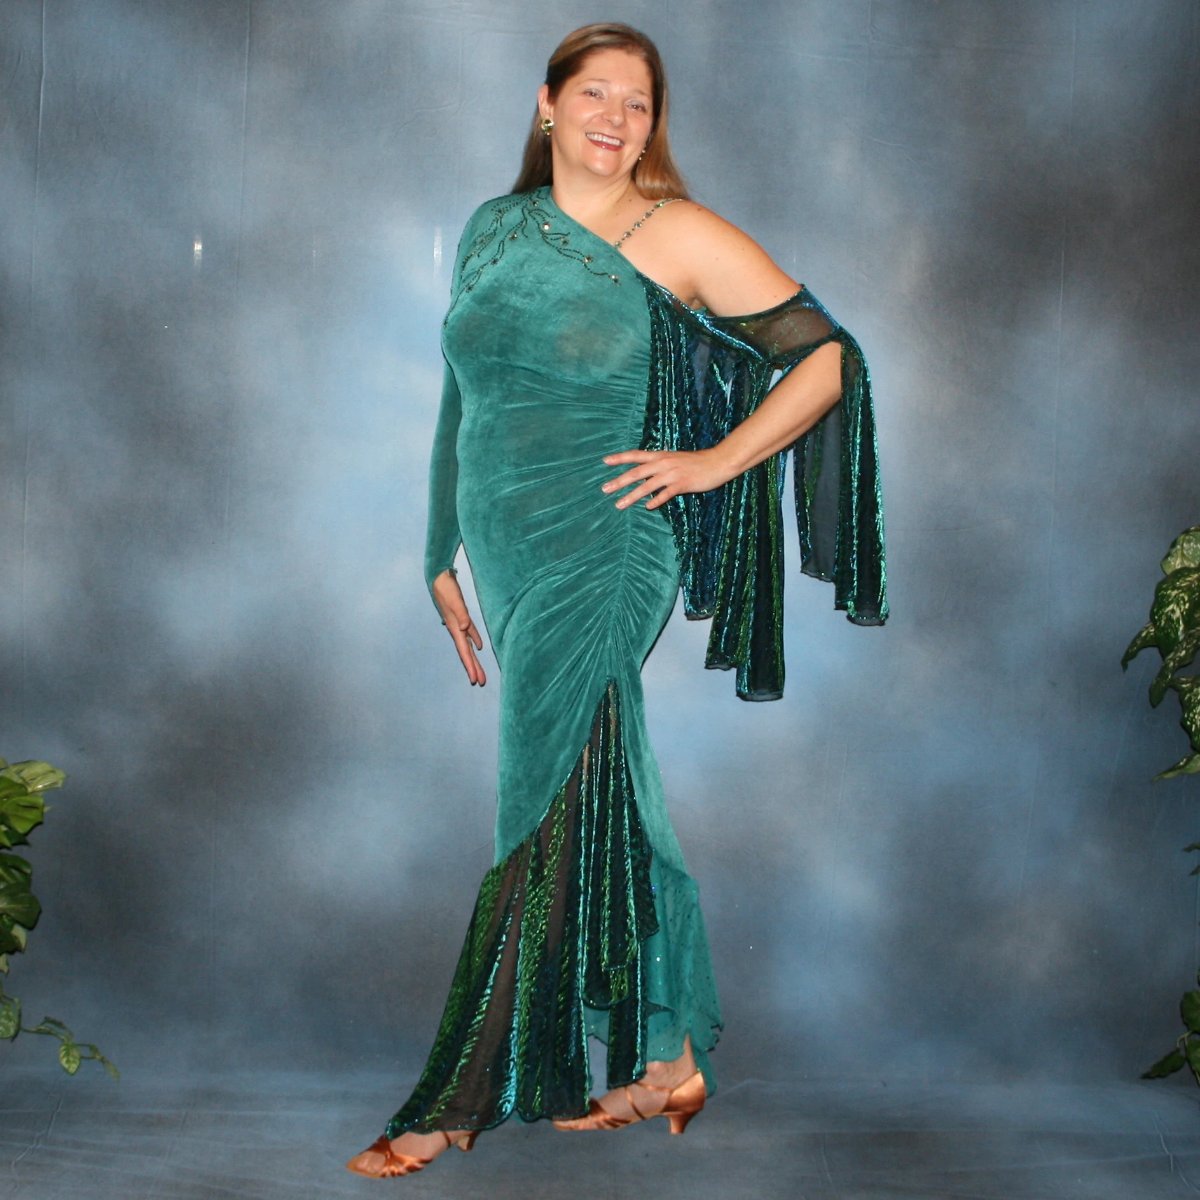 Crystal's Creations Plus size teal Latin/rhythm dress or tango dress was created in luxurious teal solid slinky with iridescent floats & flounces plus a few champagne sequined flounces at bottom skirting. It is embellished with finely detailed Swarovski stonework in blue zircon, blue zircon AB and emerald. green